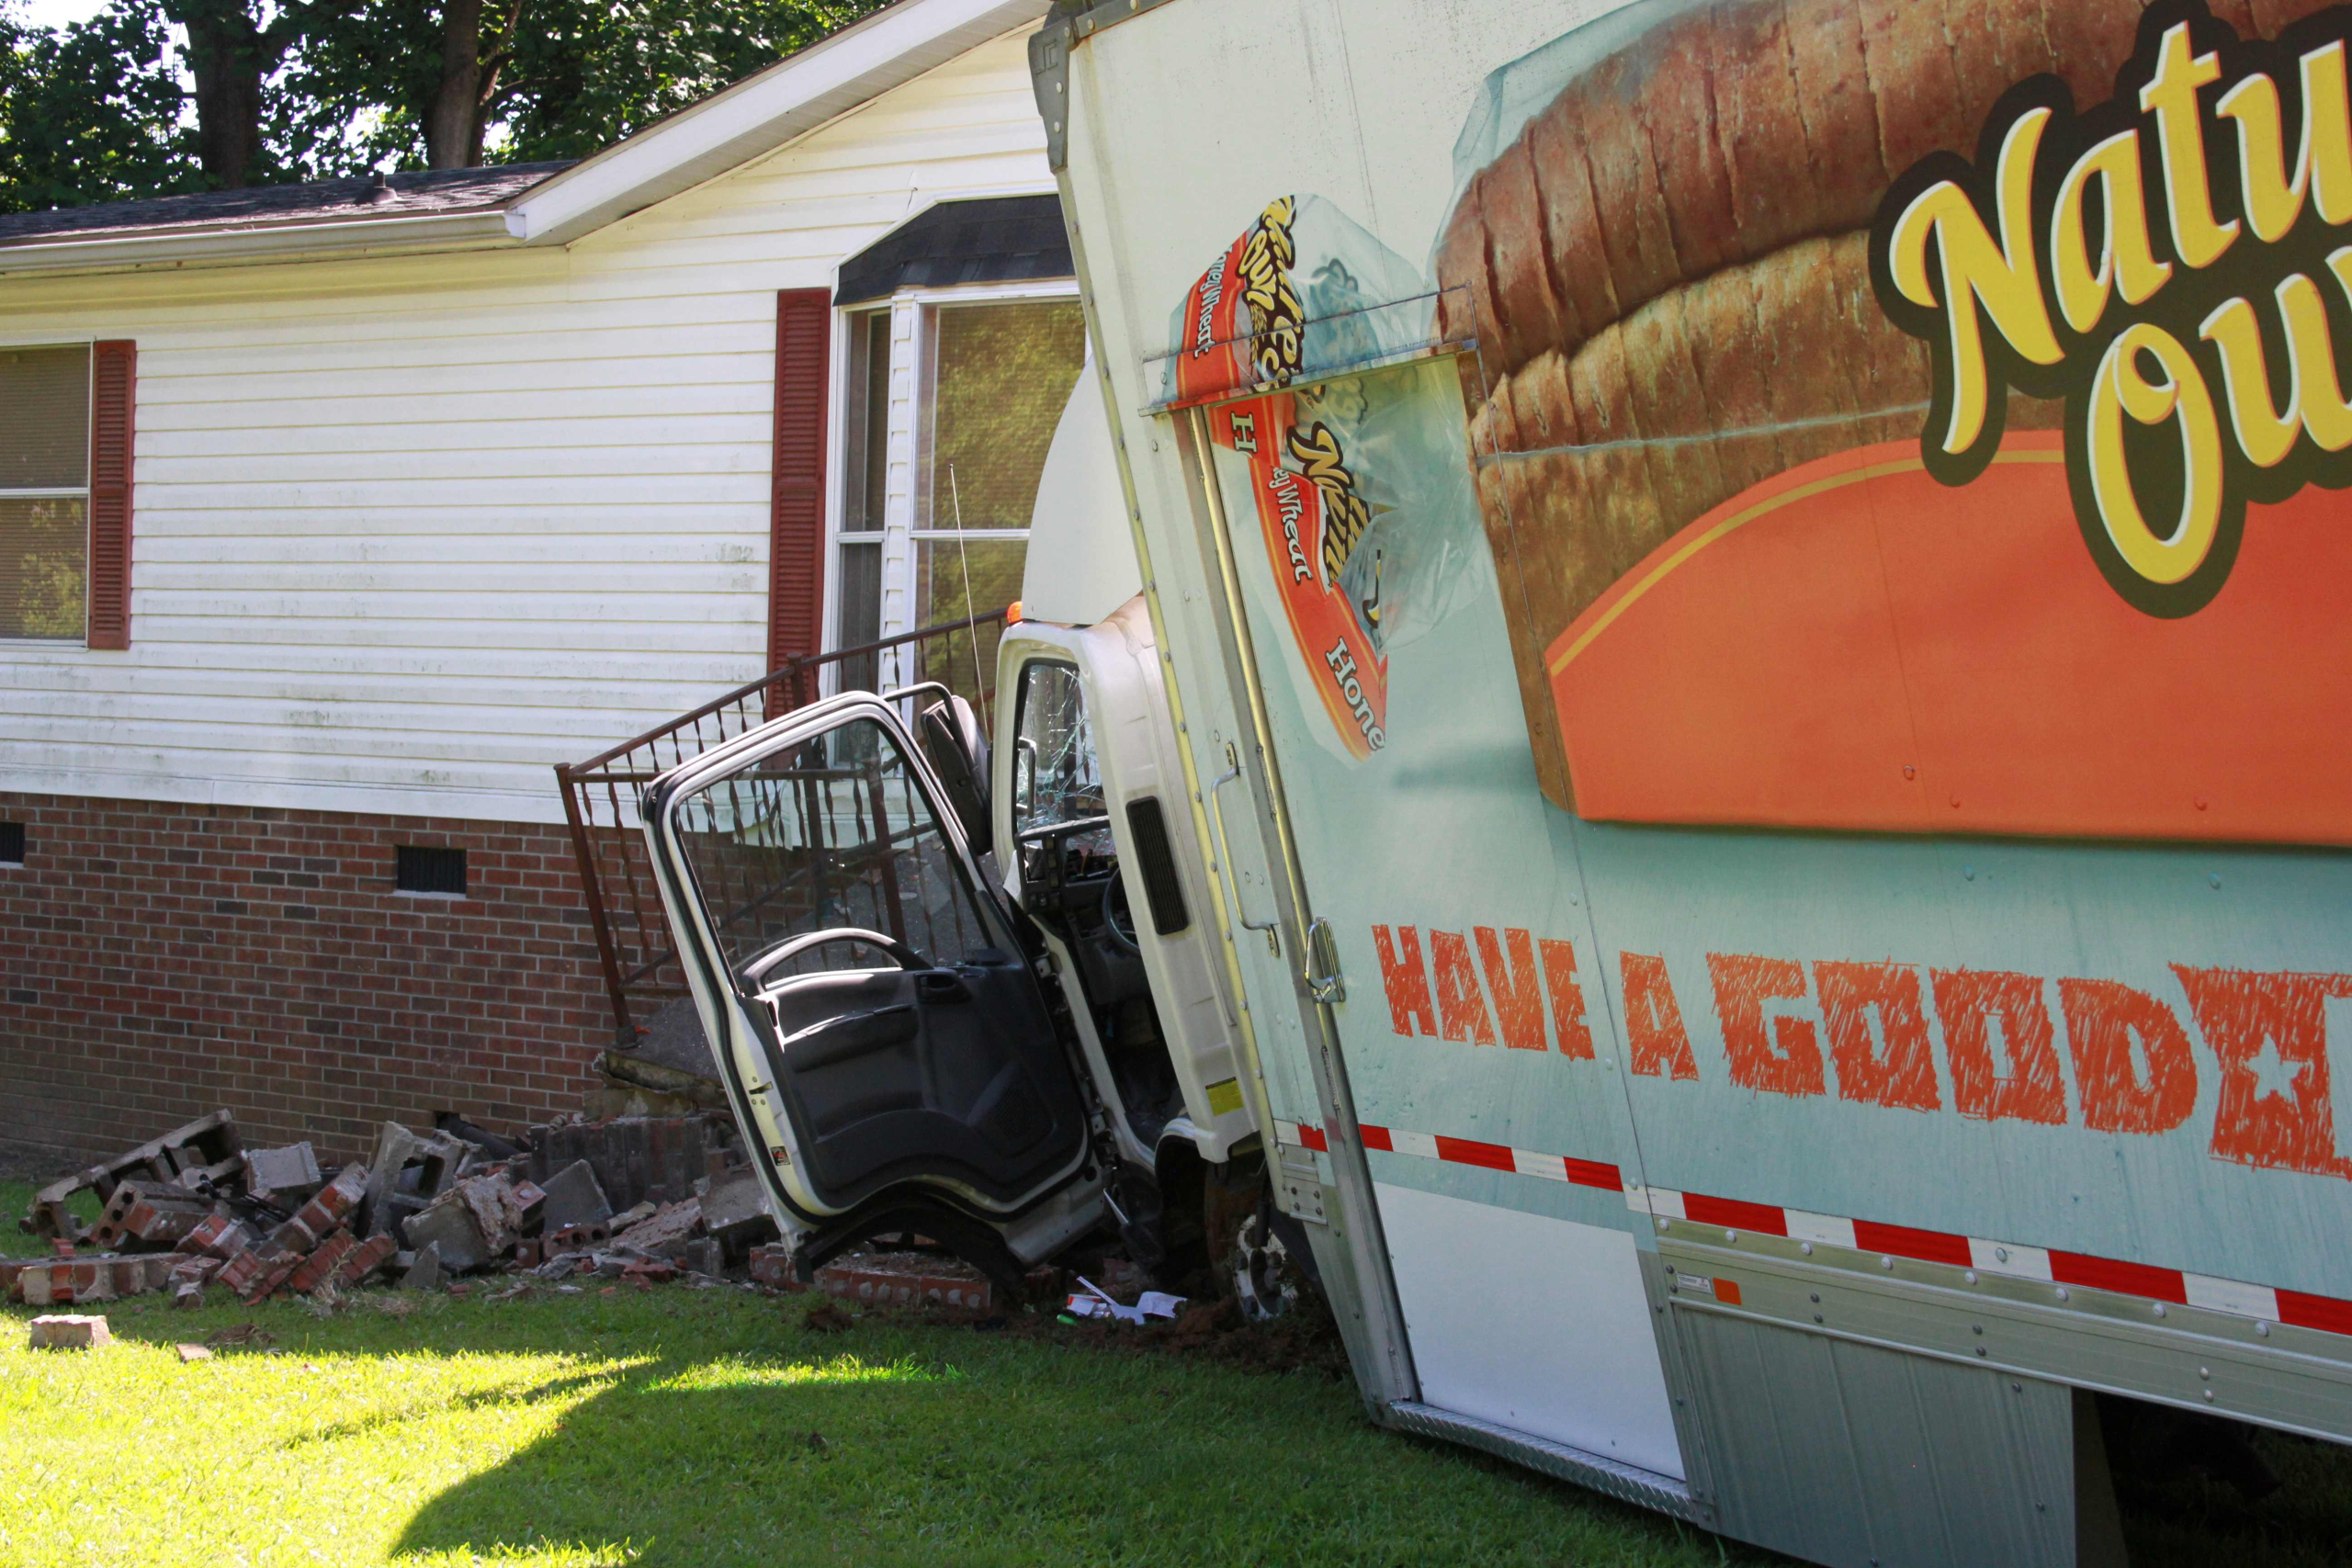 Bread Truck Crashes into House on Tuesday Morning